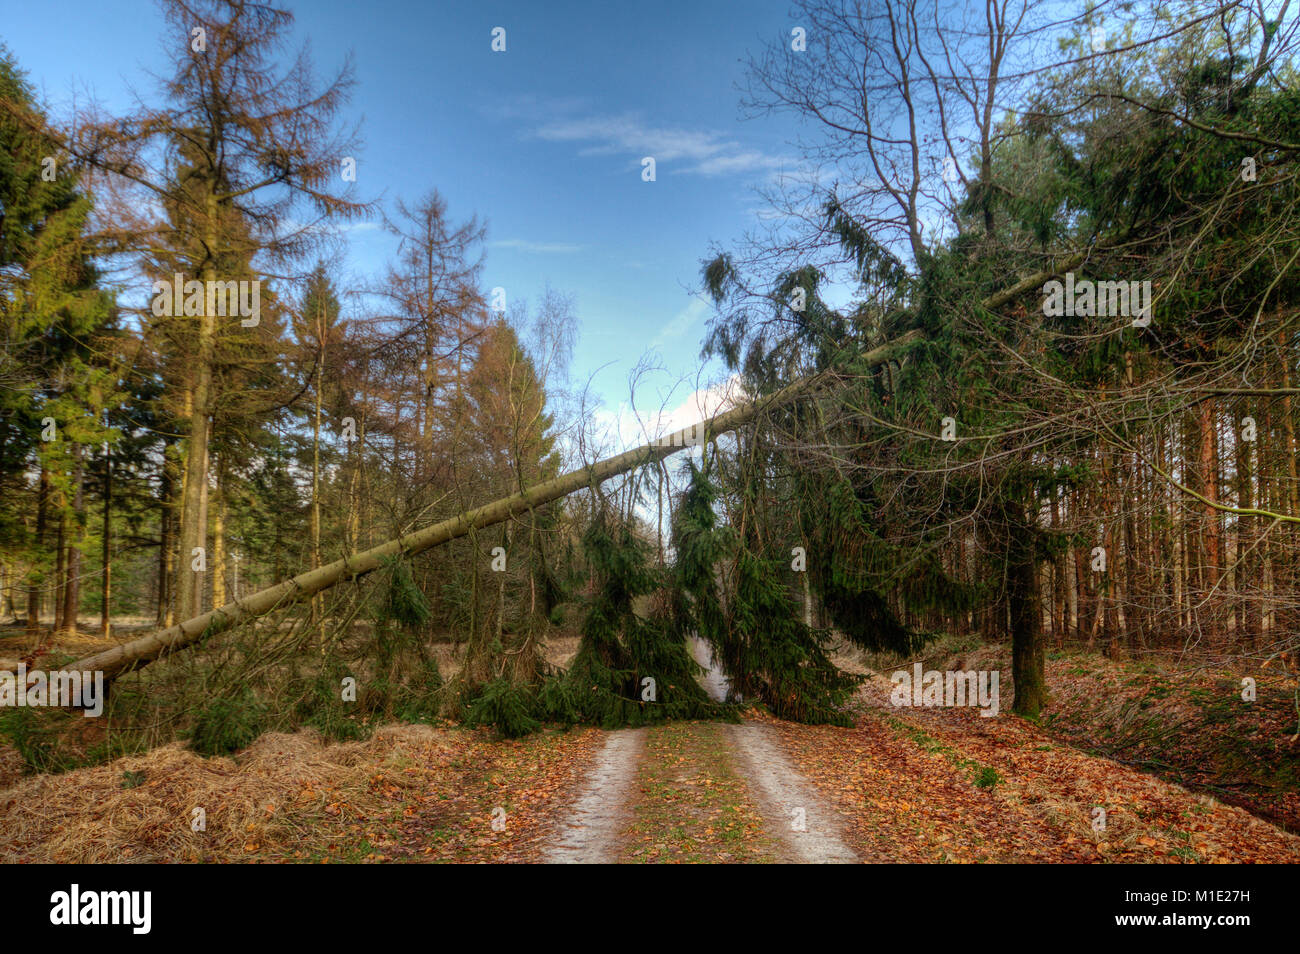 Pine tree blown over by storm blocks a path through a forest Stock Photo